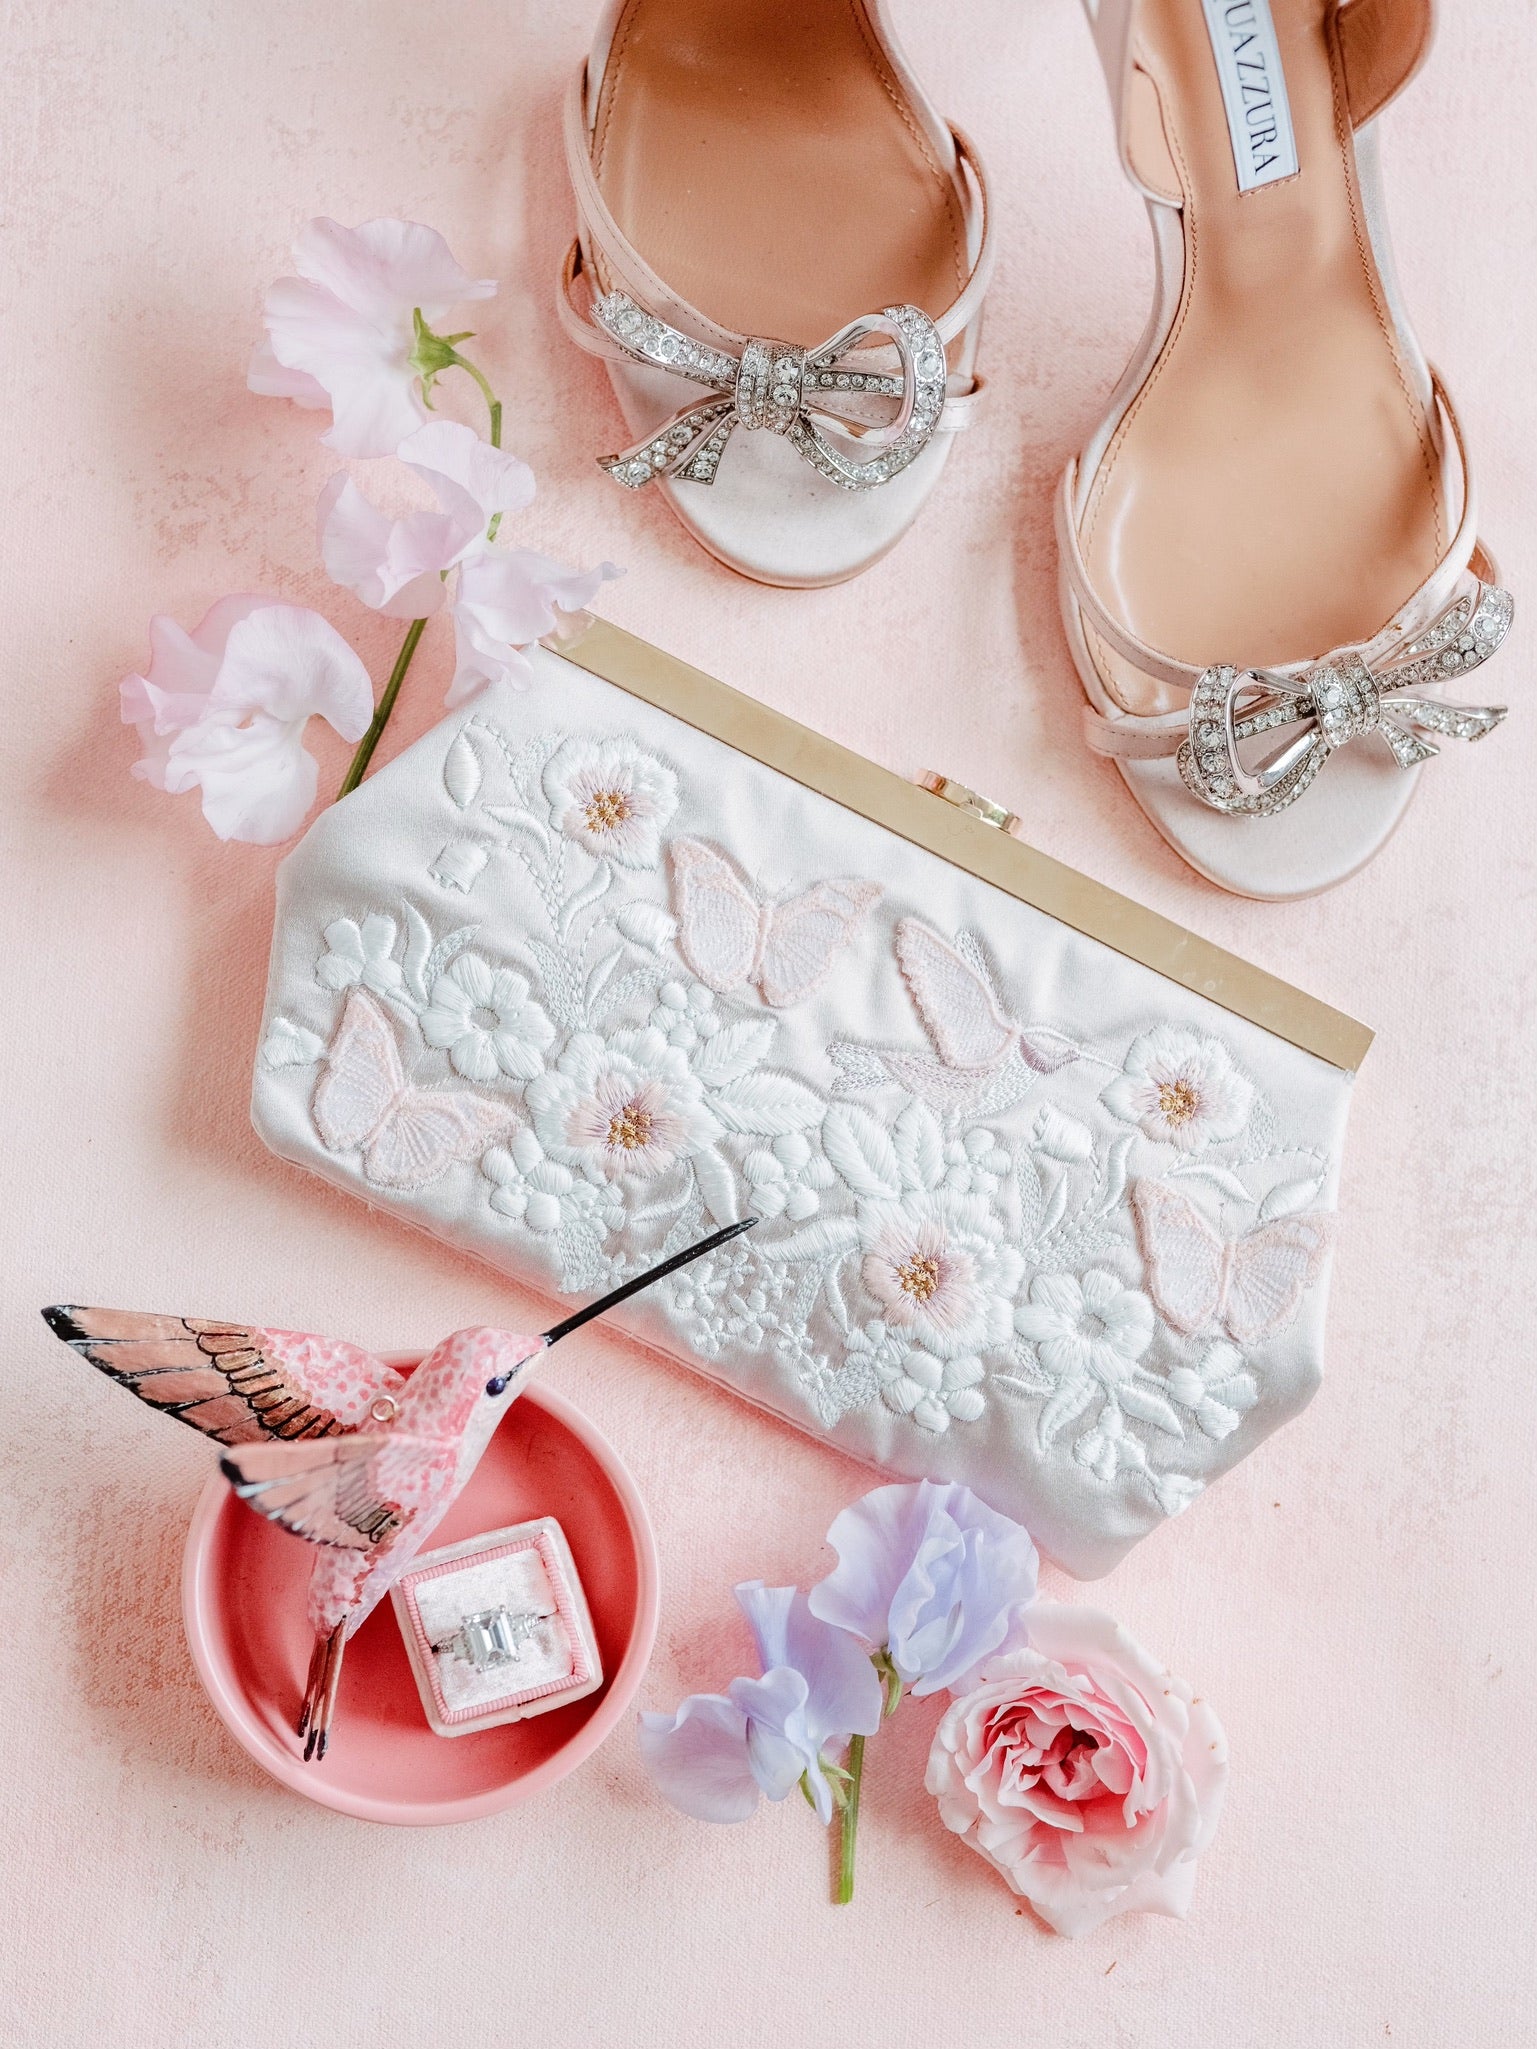 An elegant bridal arrangement featuring shimmering shoes, a floral clutch, and fresh flowers on a pink background.